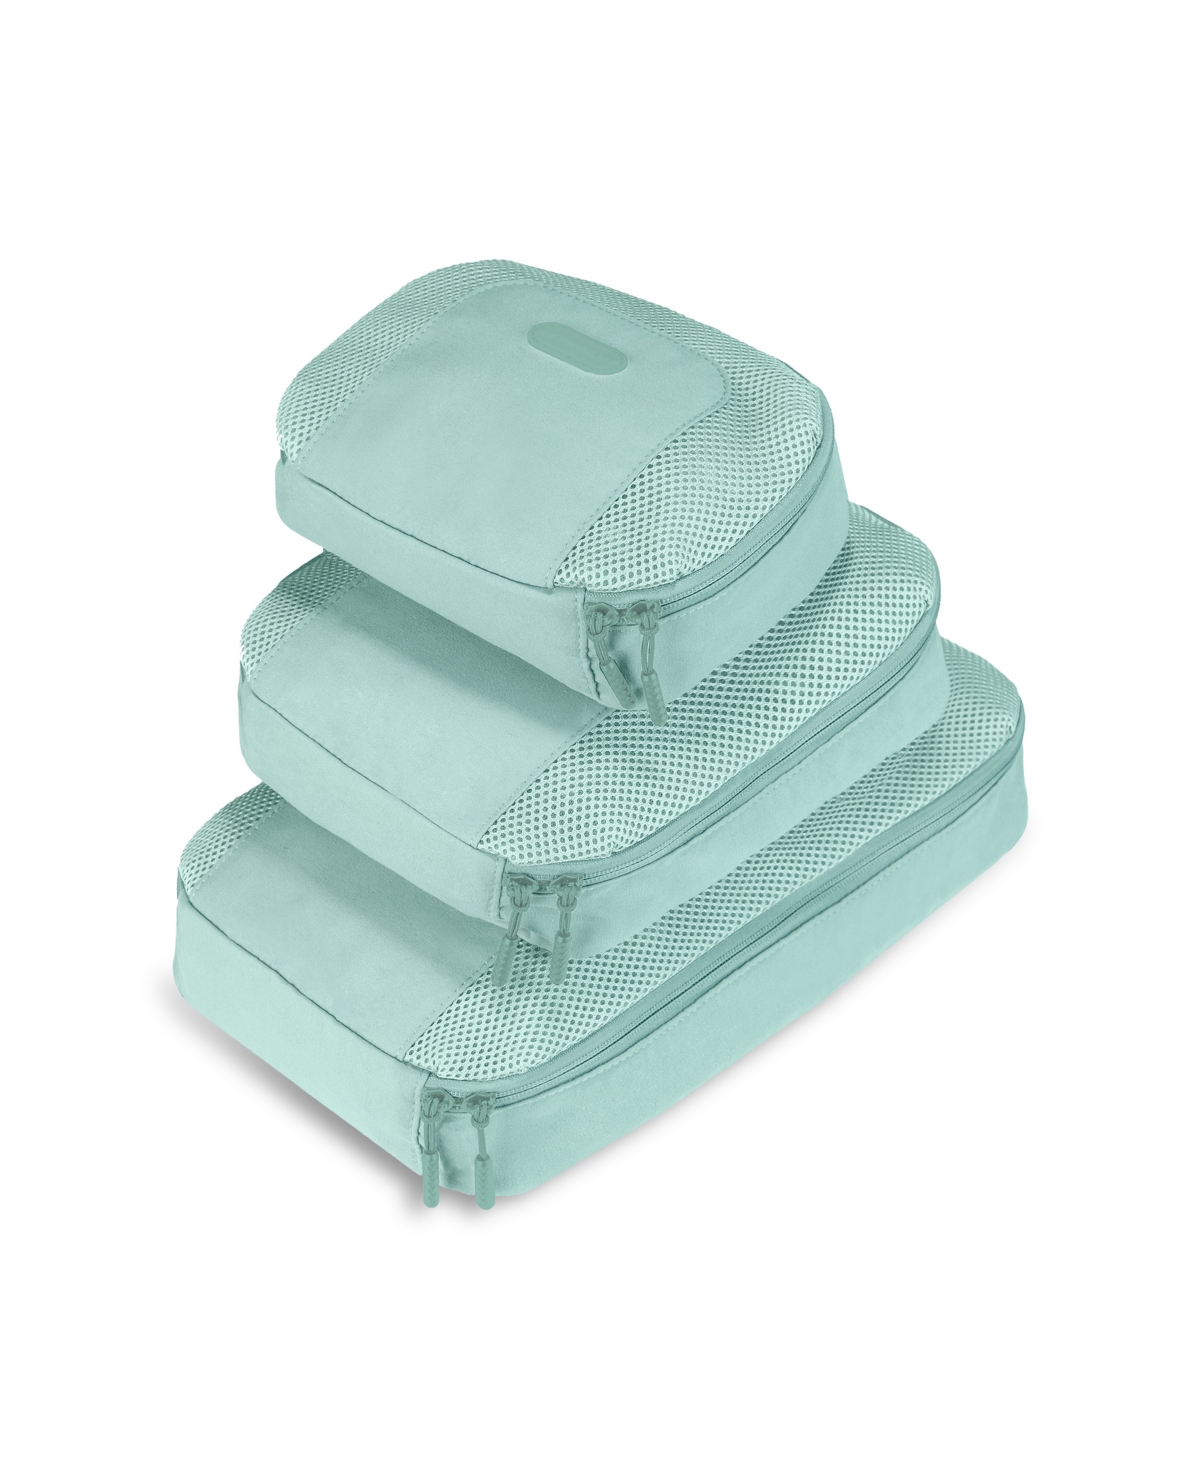 Travelon Packing Cubes, Set Of 3 In Mint Green